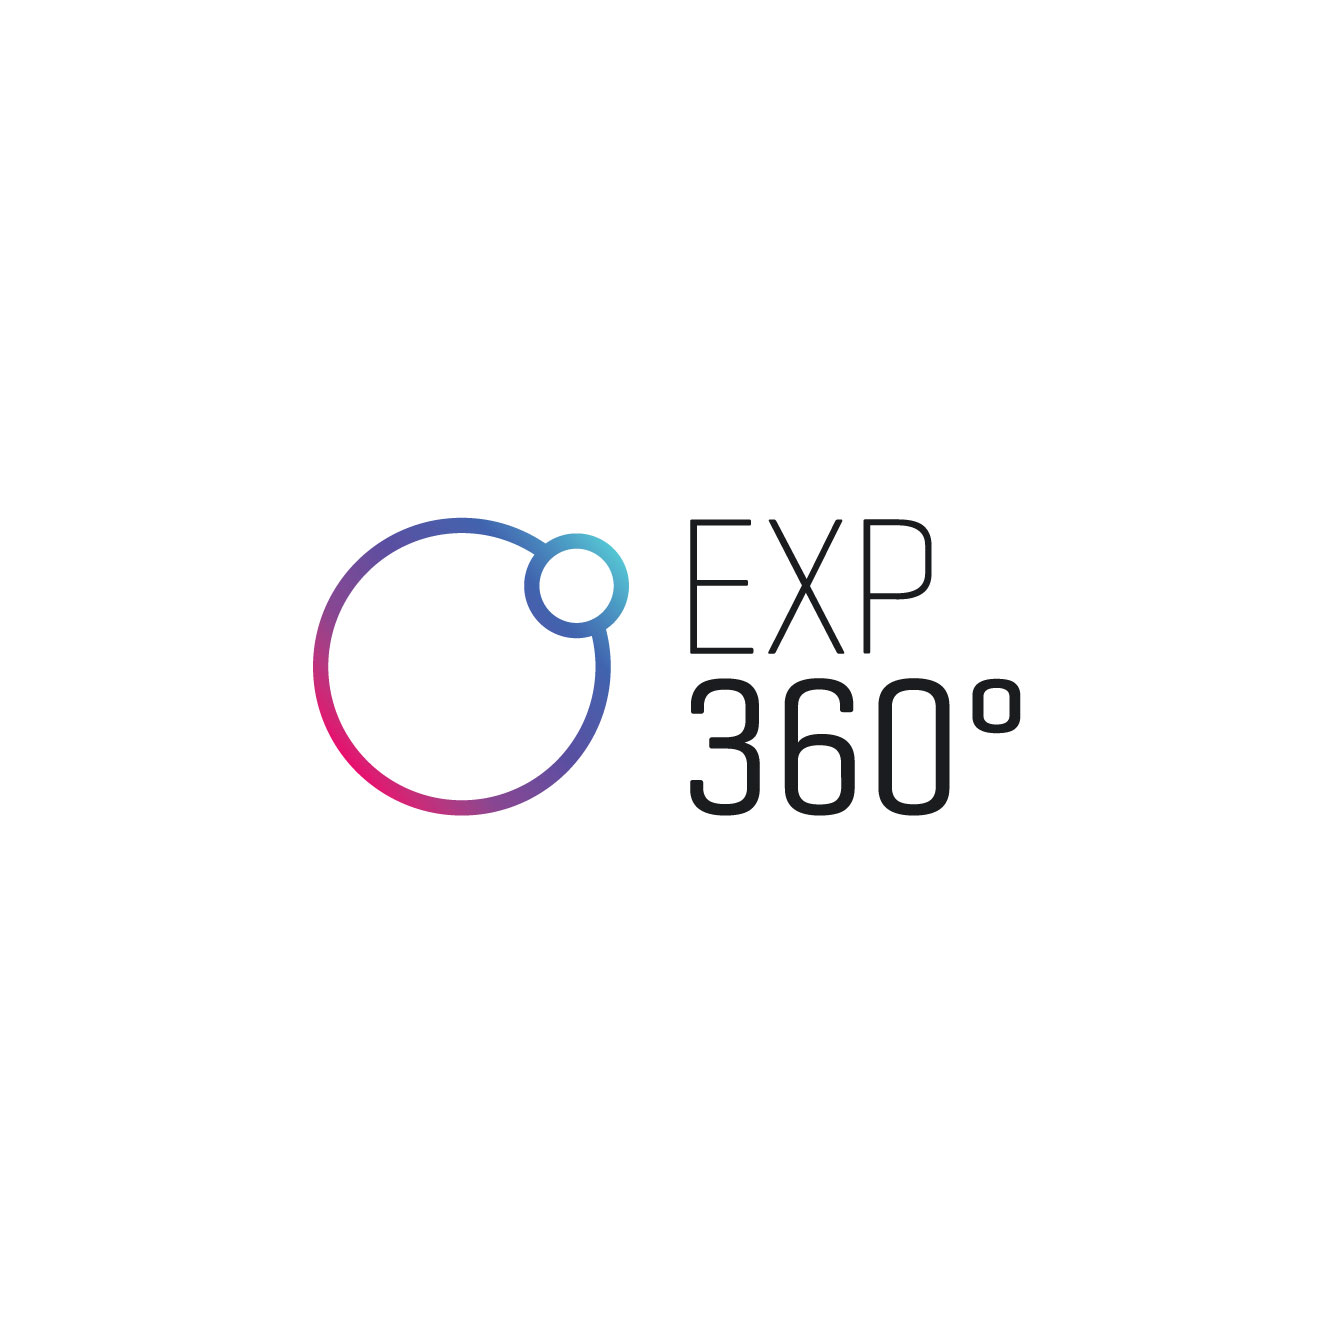 The Experience 360° Logo System